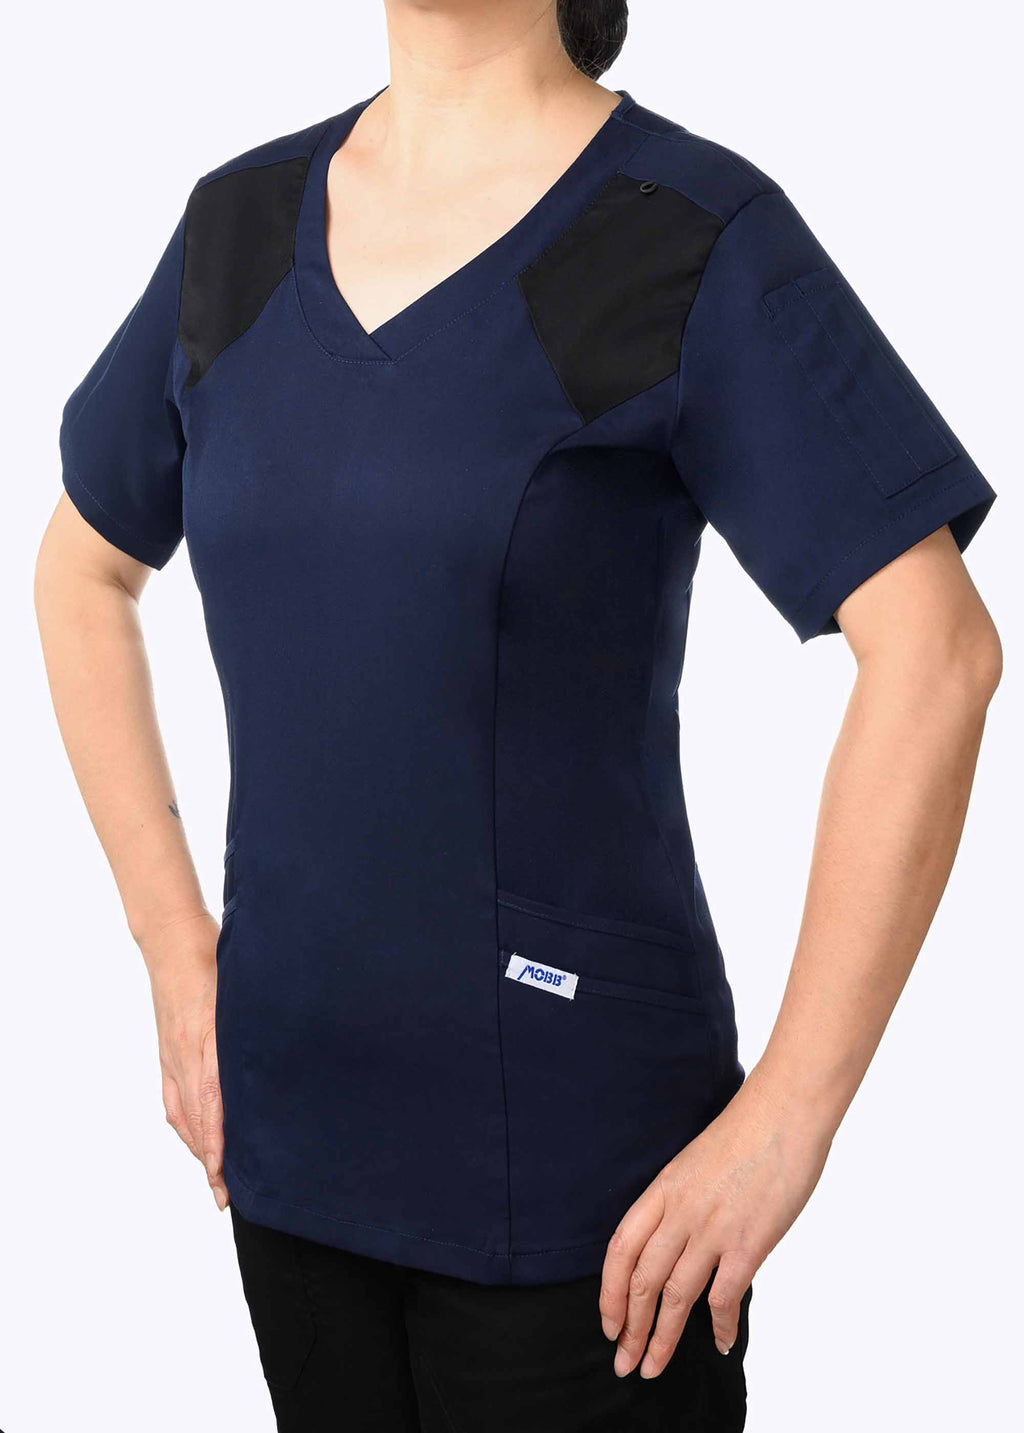 Product - The Crystal Scrub Top